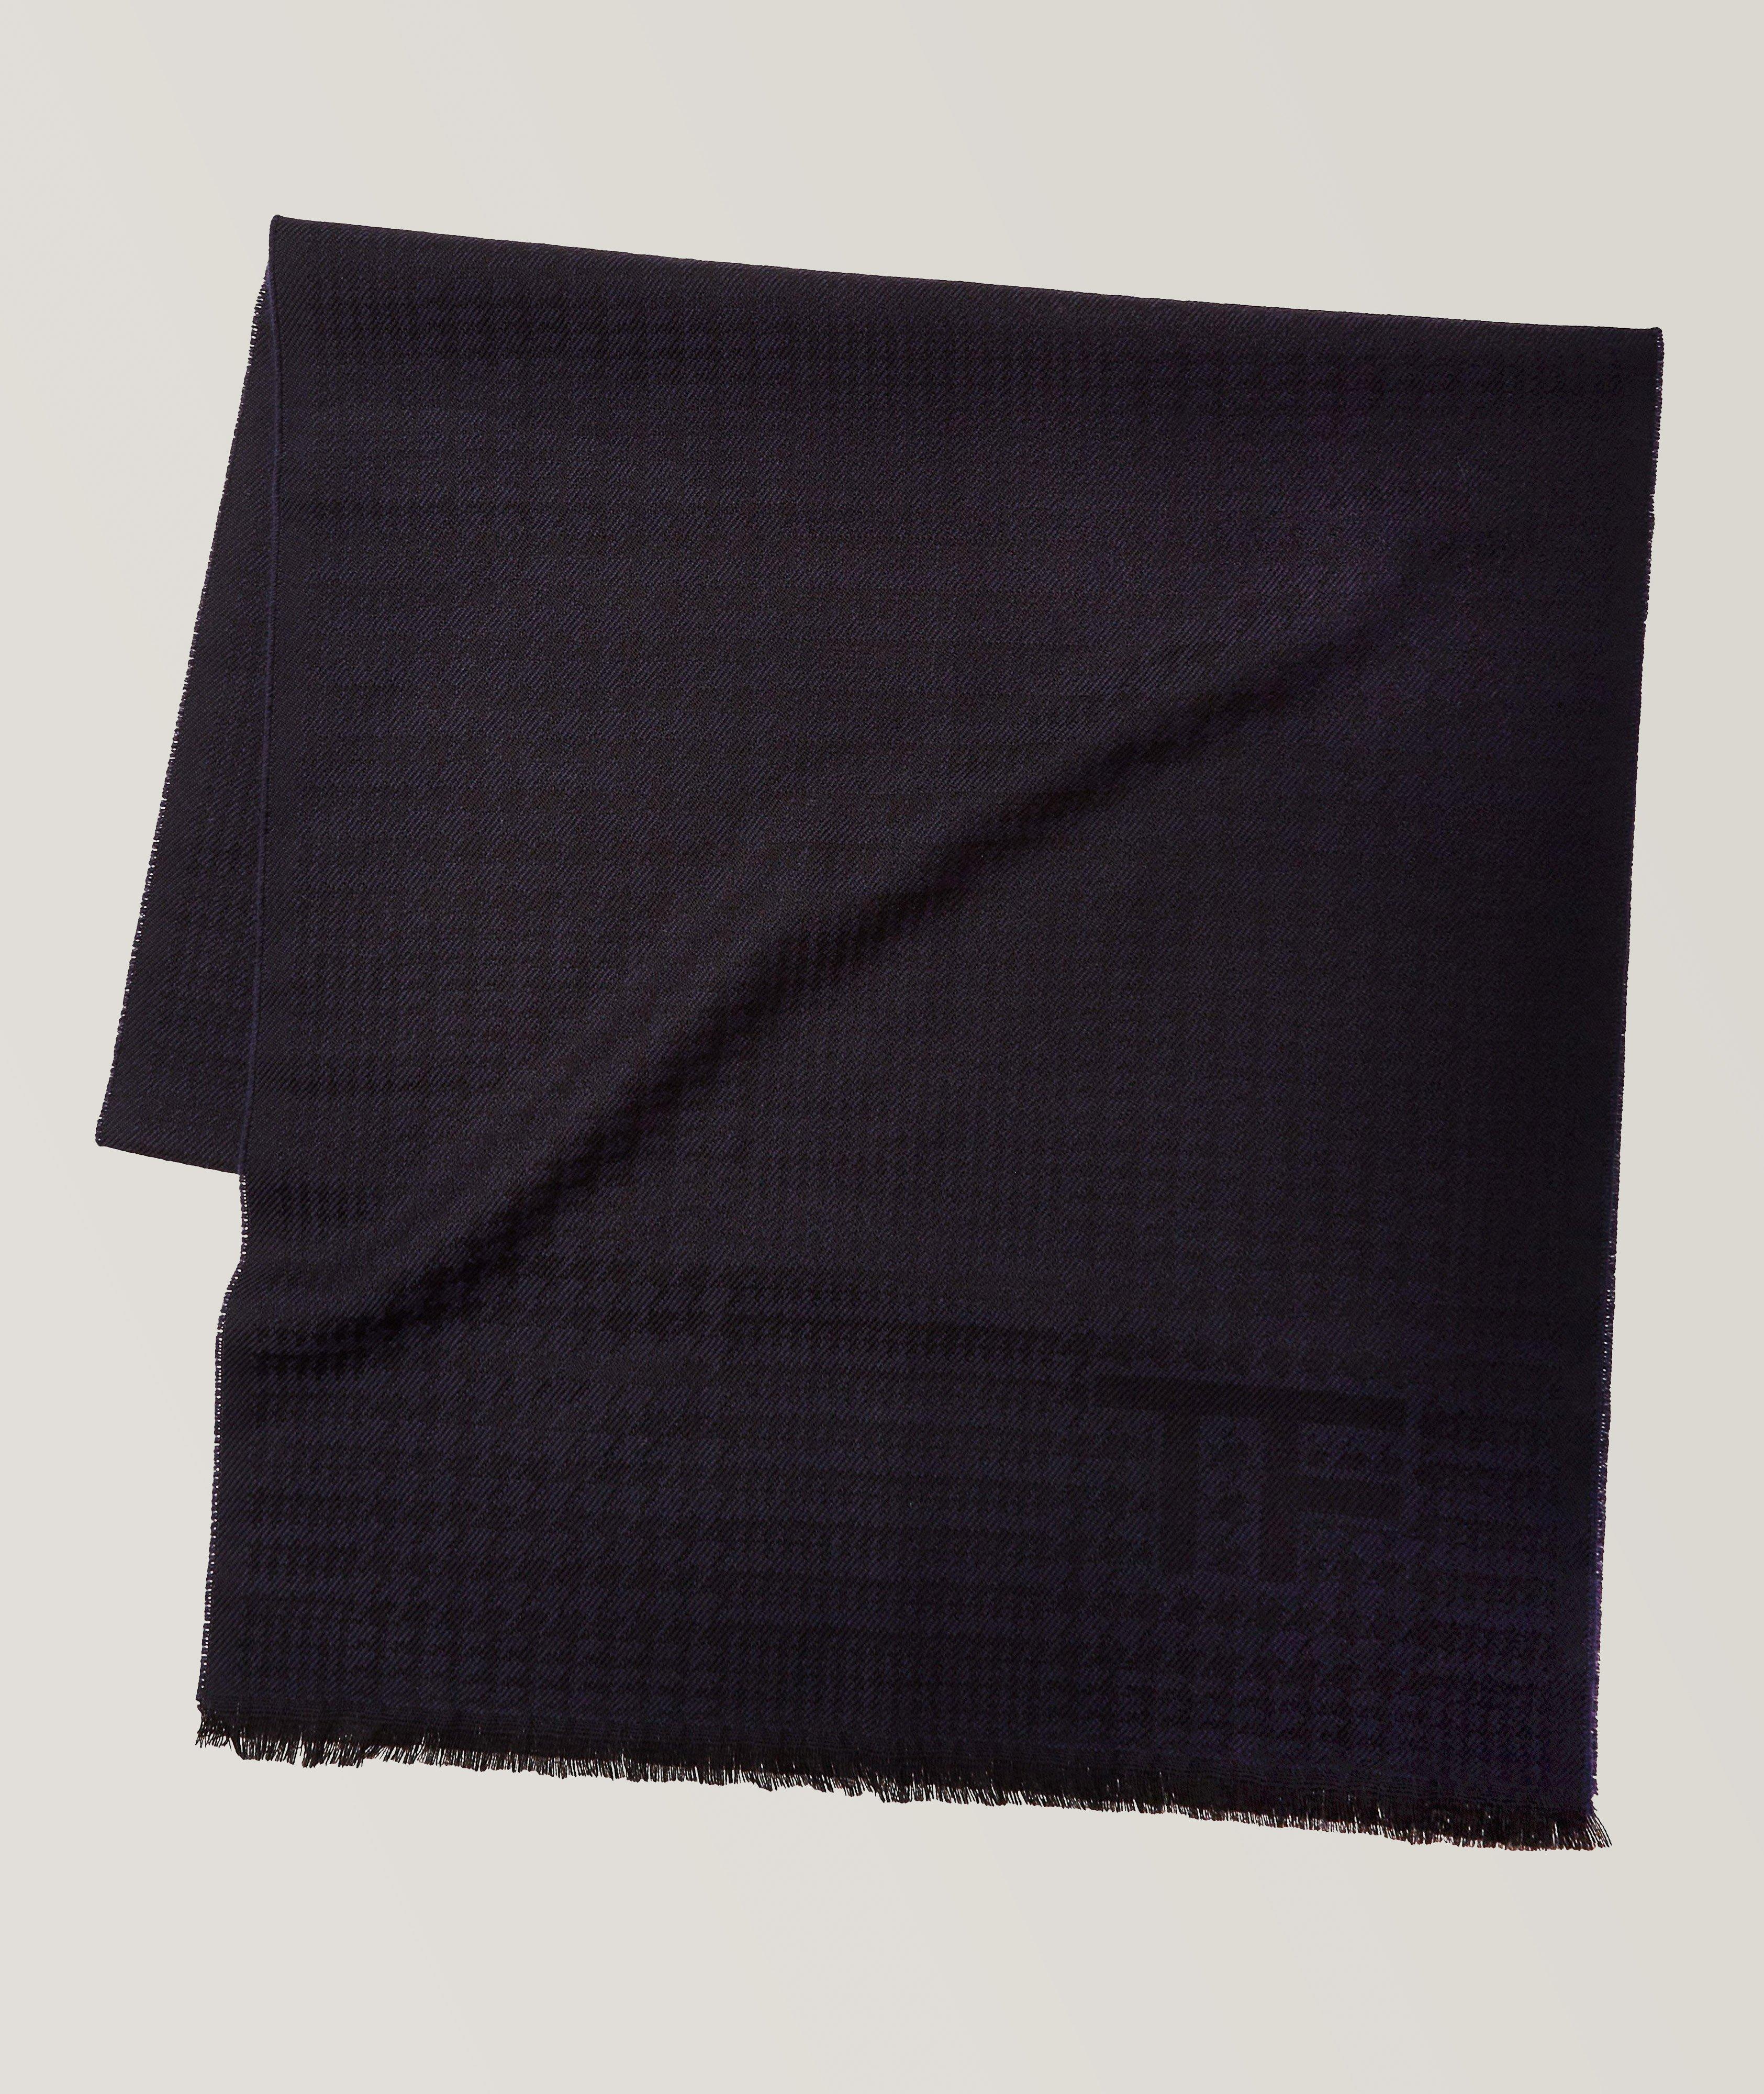 Prince Of Wales Check Wool Scarf image 0